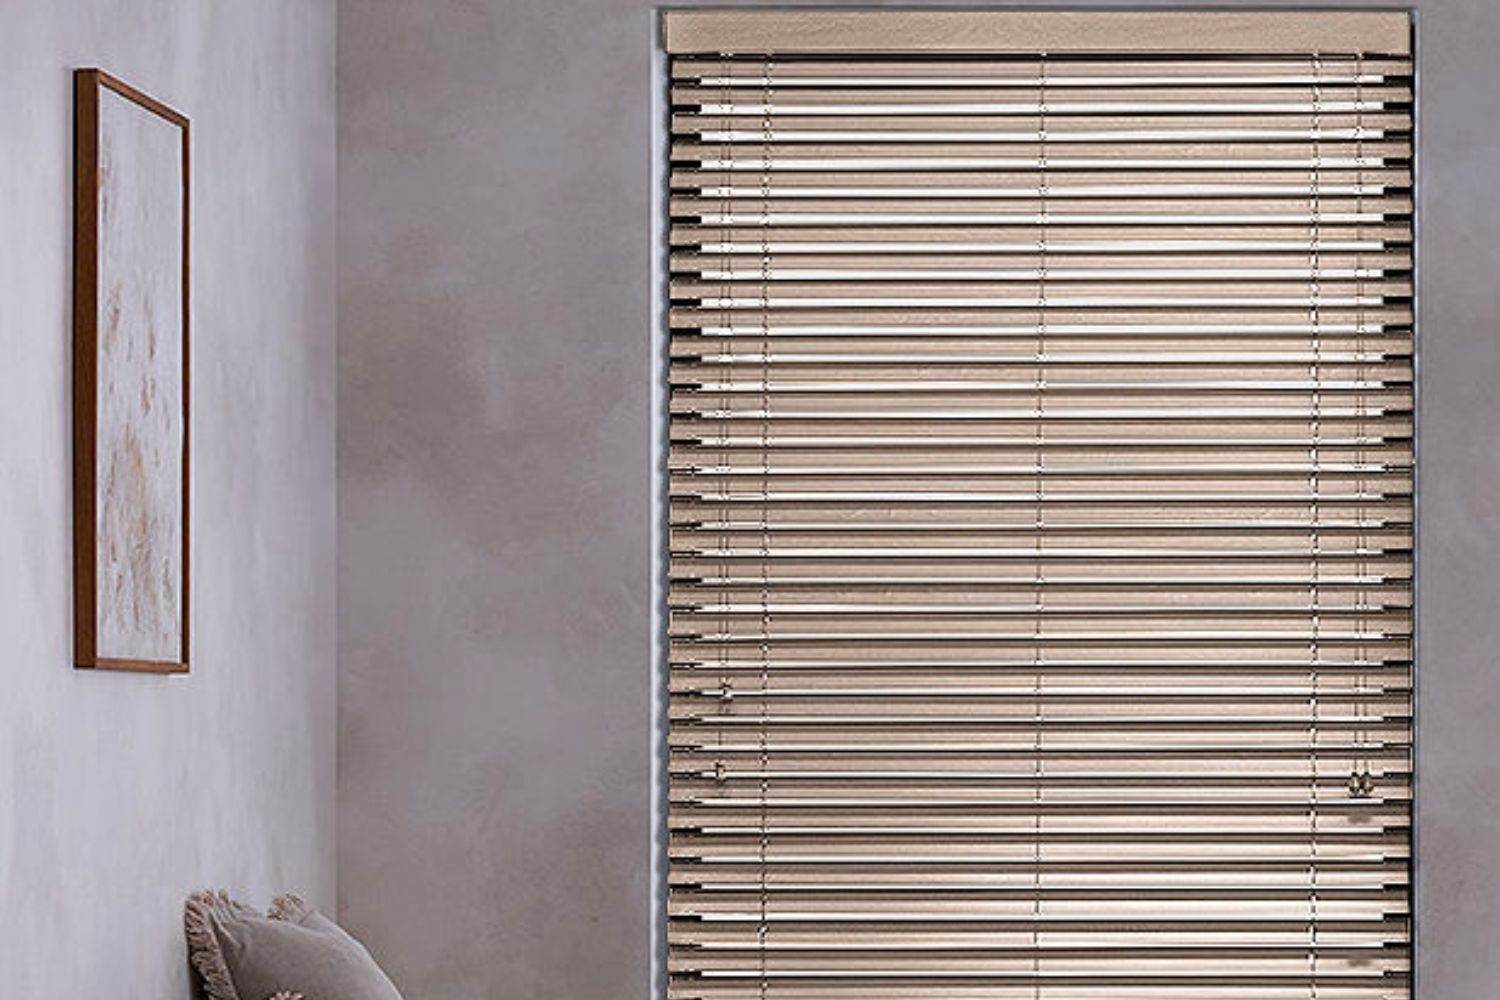 The Best Places to Buy Blinds Online Option: The Shade Store